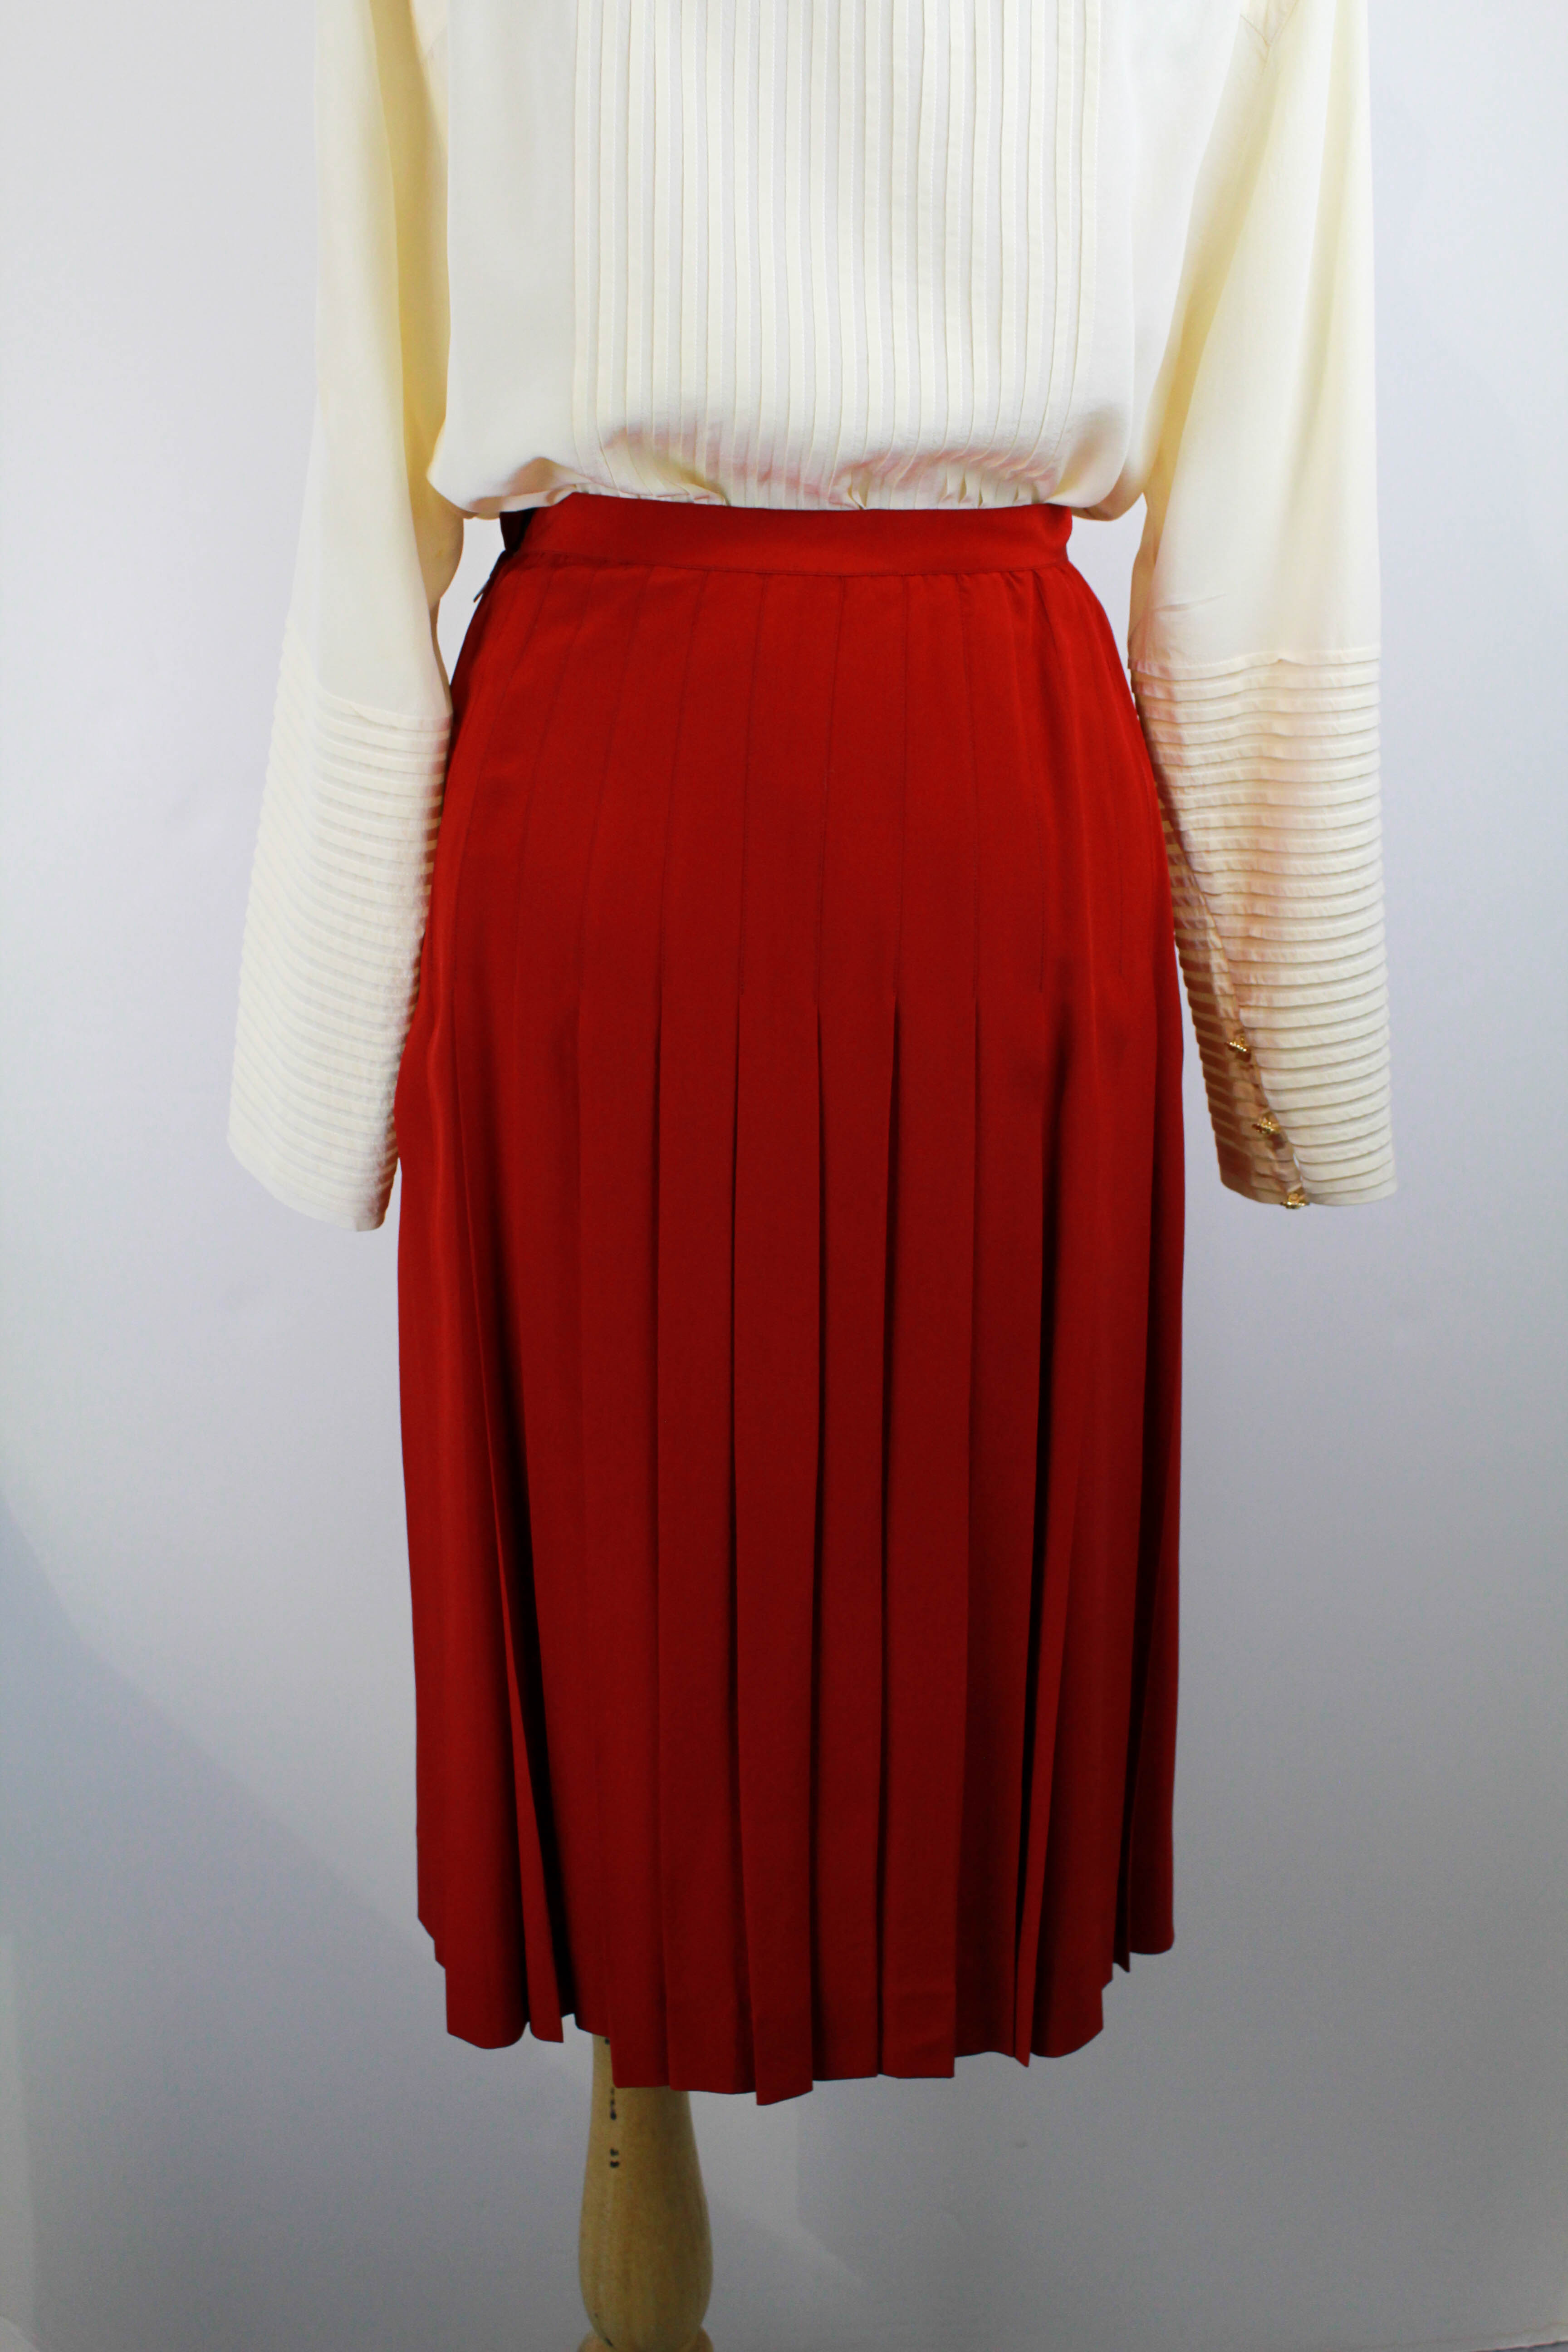 Chanel Pre-Owned 1980s high-waisted pencil skirt - Orange